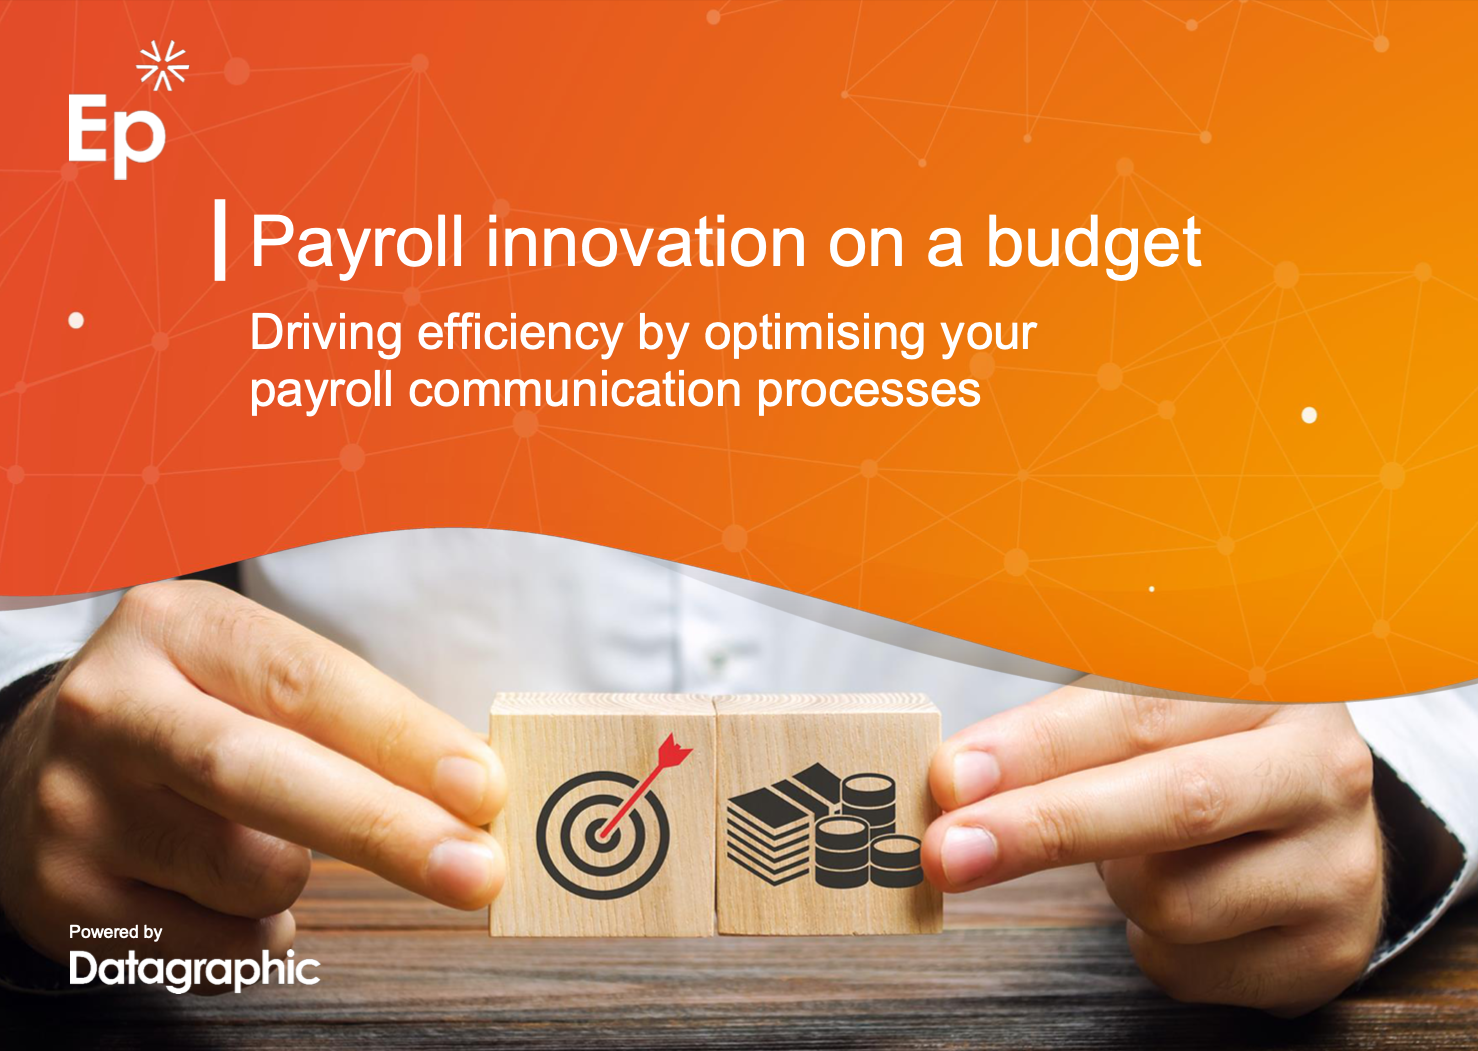 Epay guide to payroll innovation